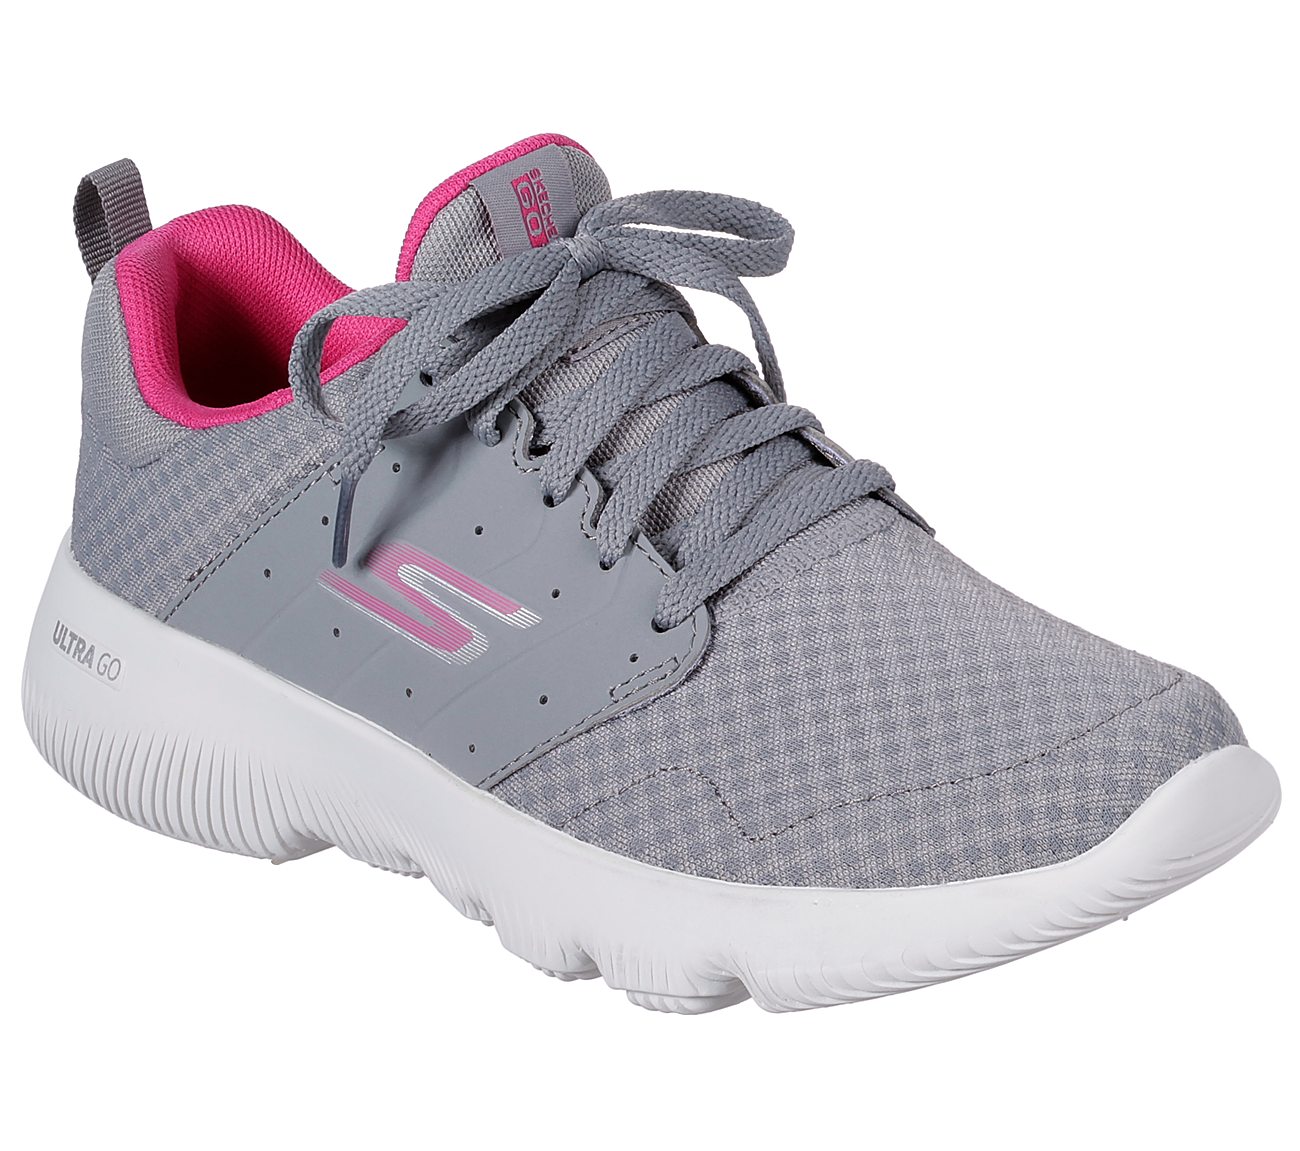 GO RUN FOCUS-APPROACH, GREY/PINK Footwear Lateral View